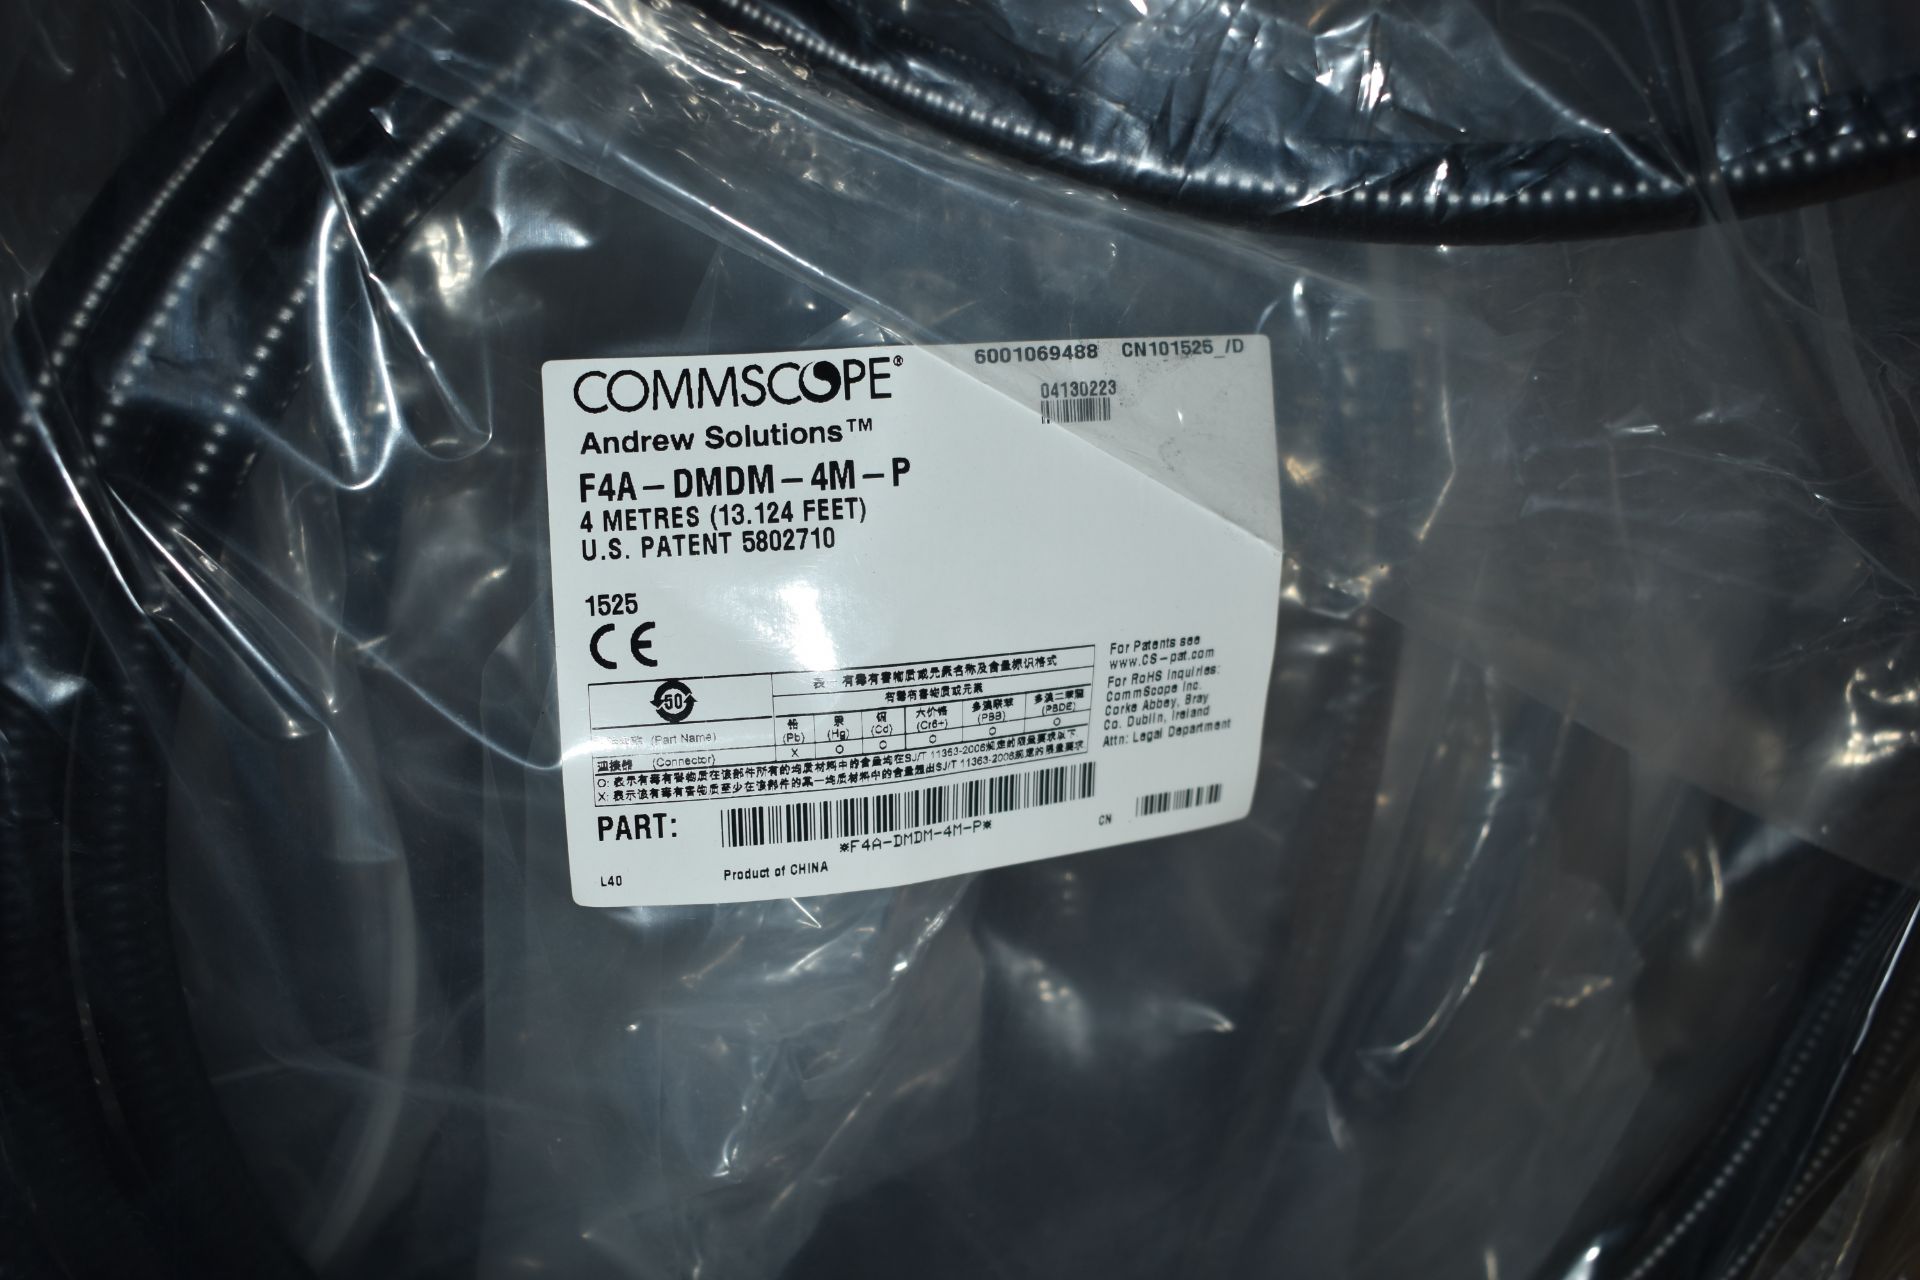 22 x Commscope Heliax Superflexible SureFlex Jumper Cables With Interfaces - Brand New - Type F4A- - Image 3 of 5